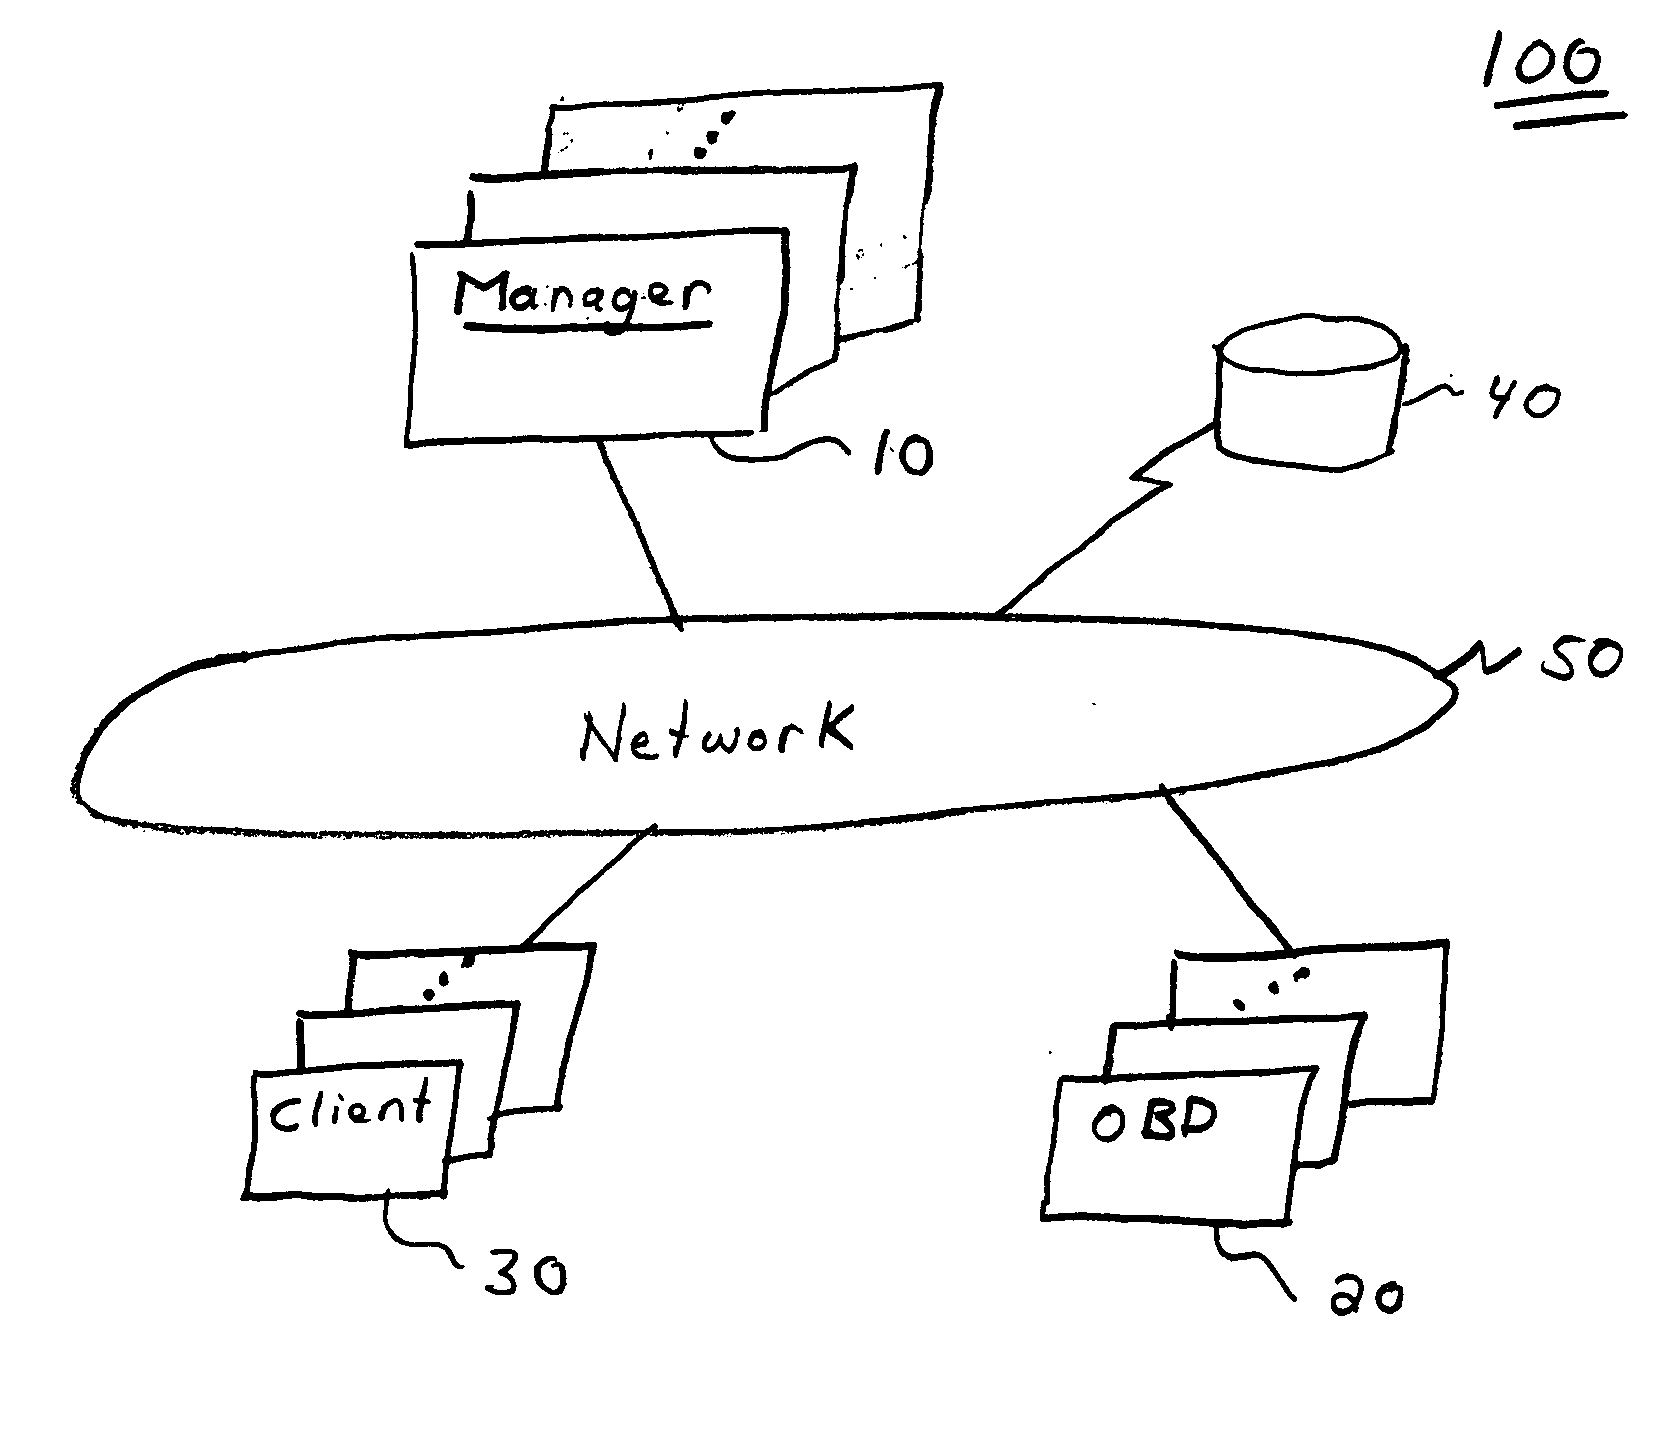 Distributed object-based storage system that stores virtualization maps in object attributes